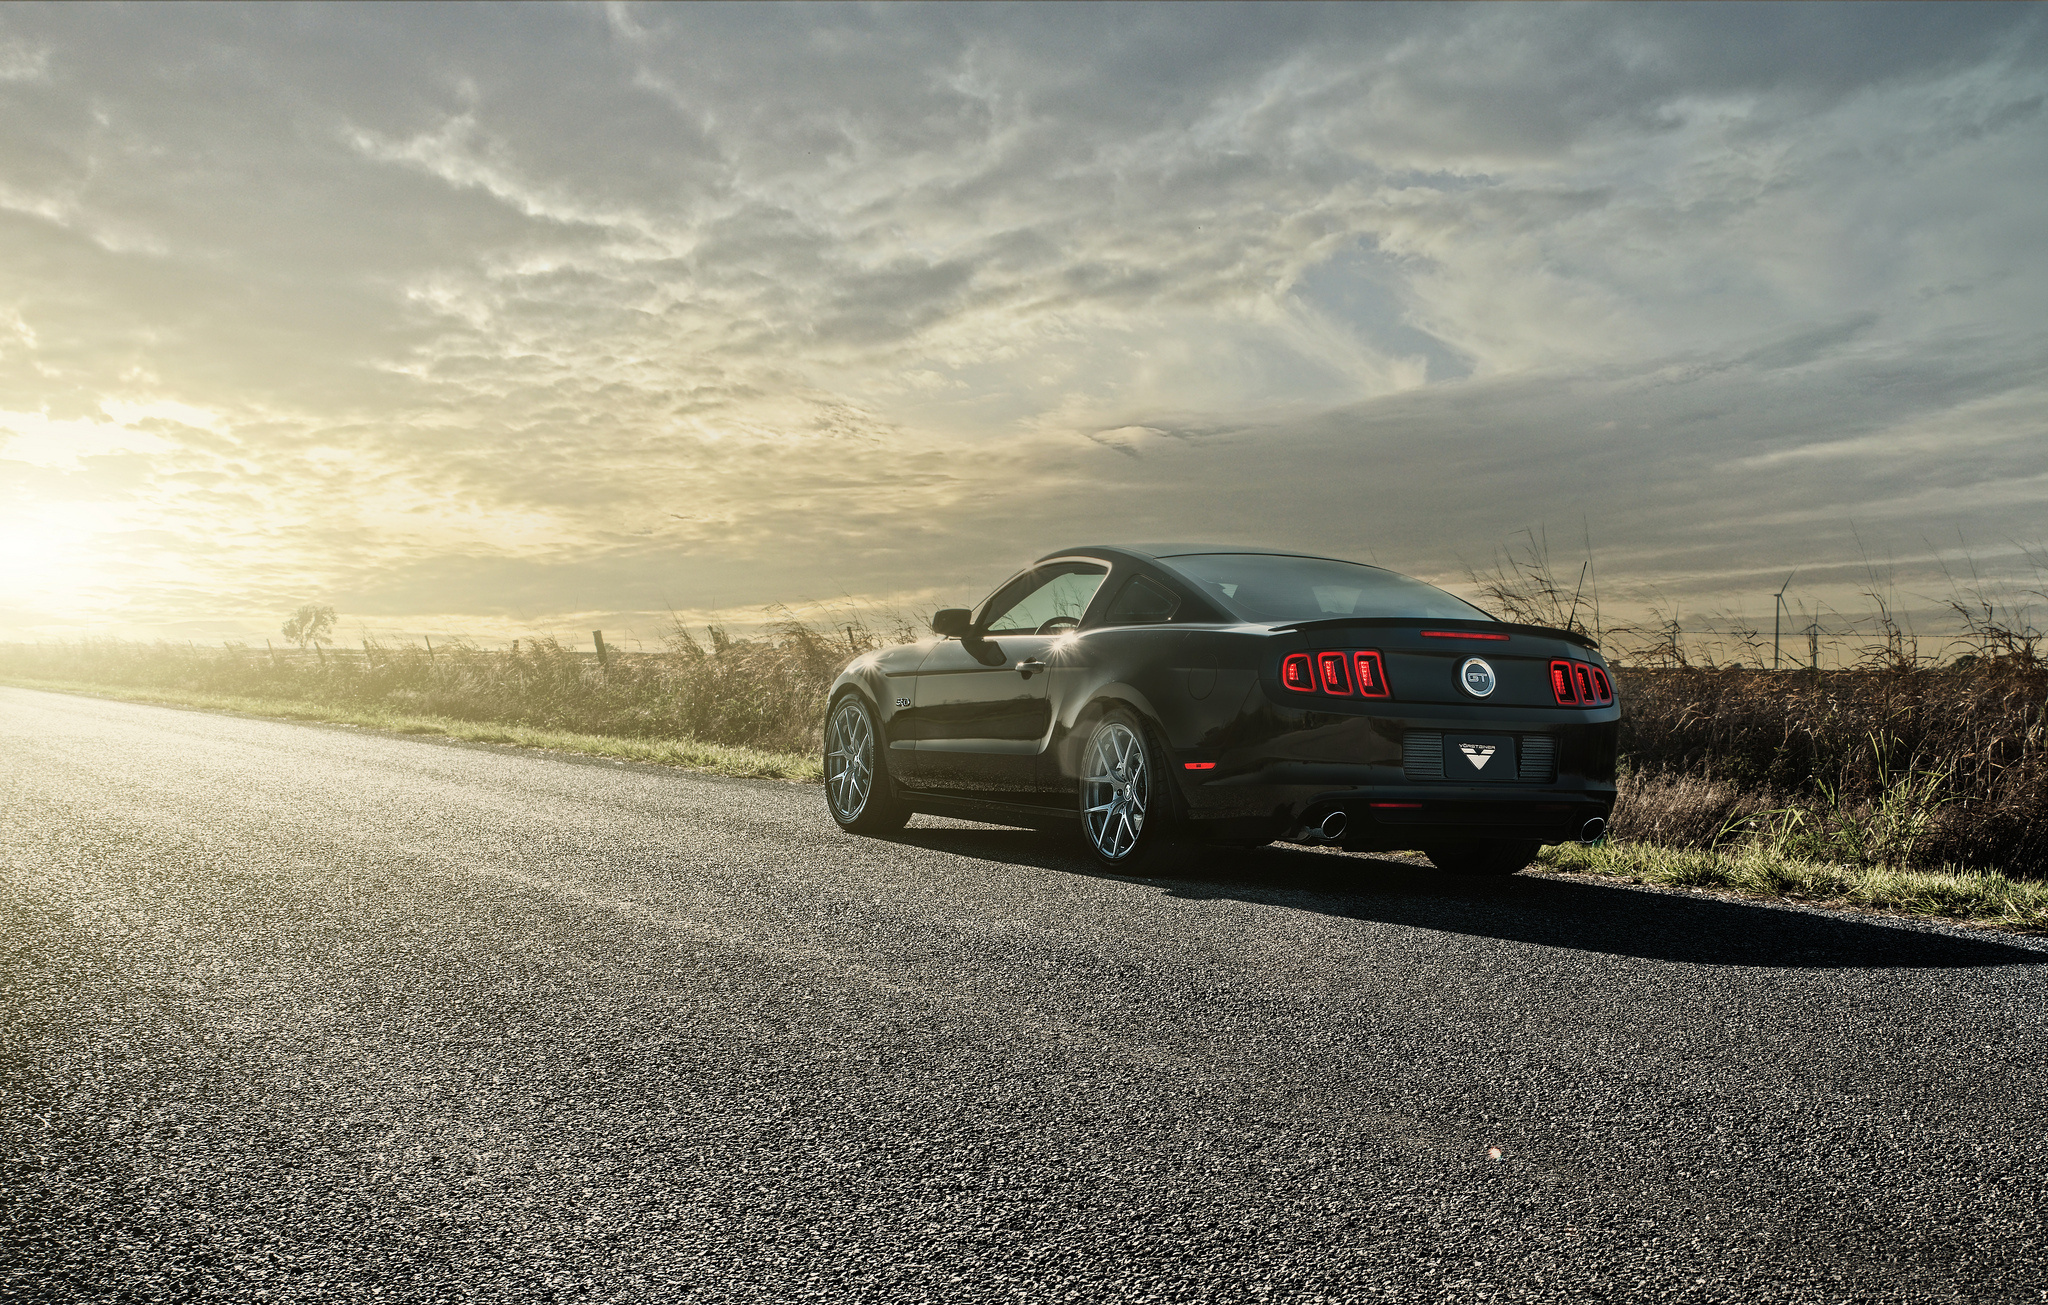 auto, mustang, cars, shine, light, road, back view, rear view, gt Image for desktop